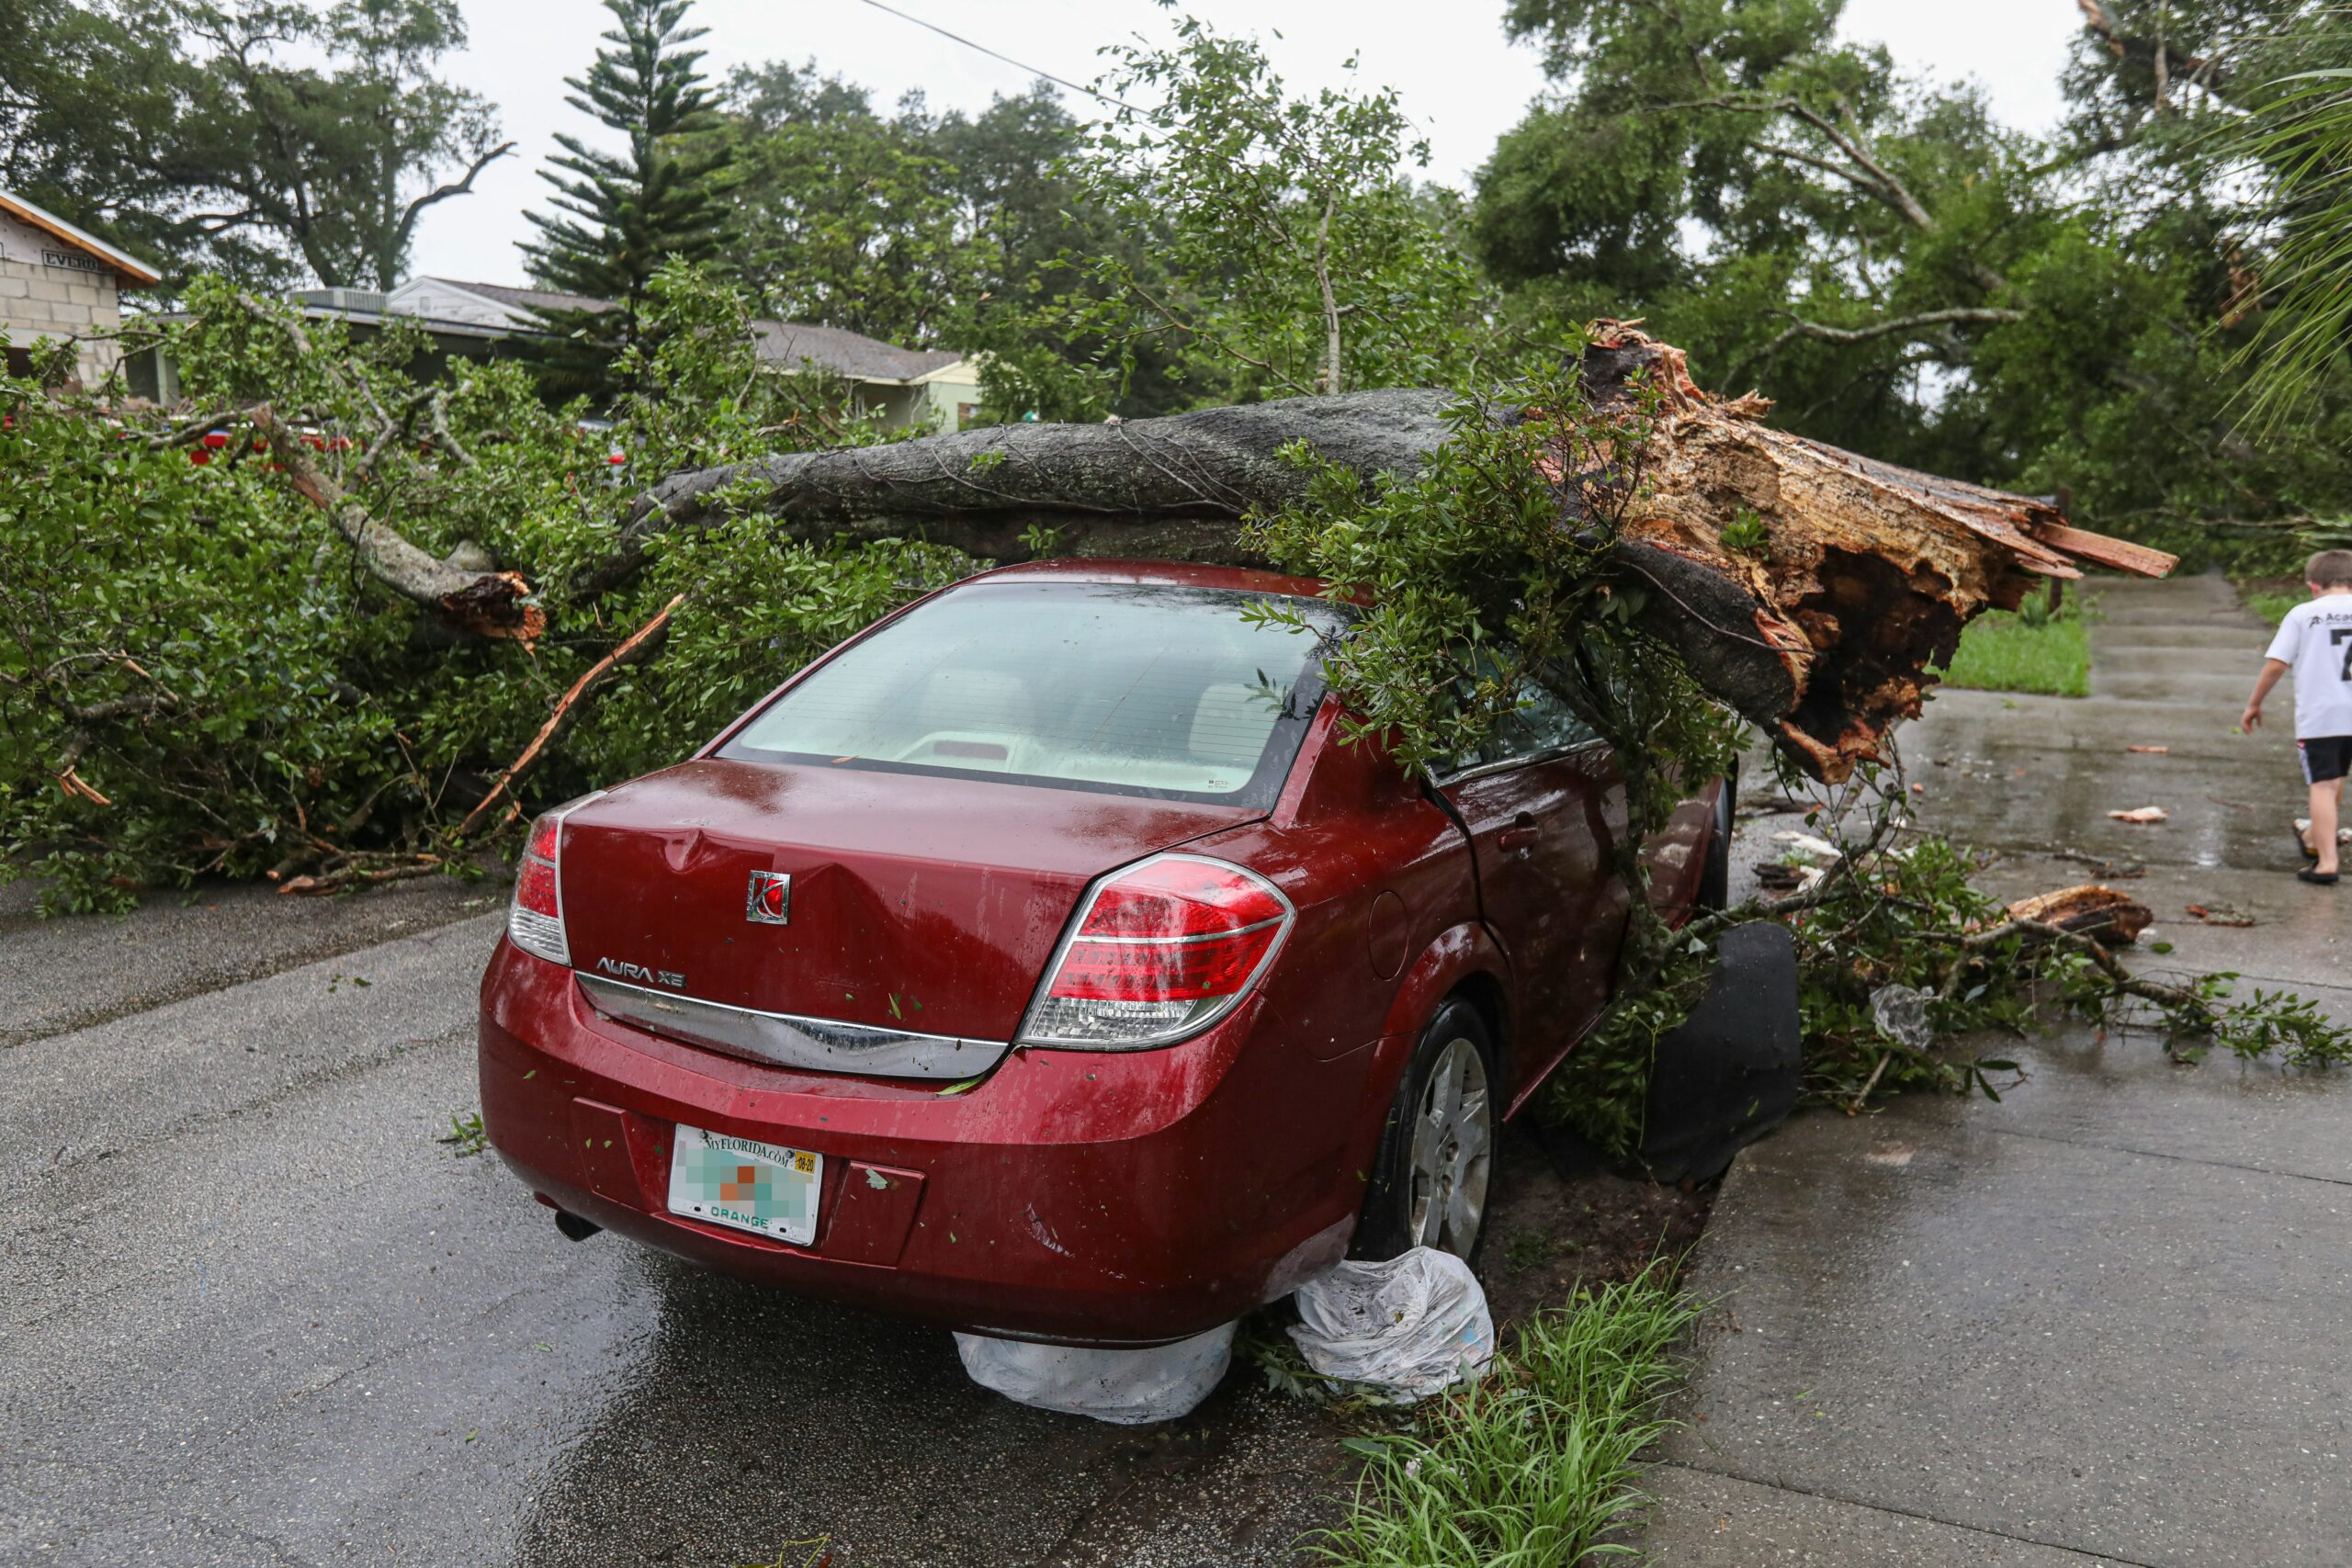 Red car damaged by a fallen tree, highlighting the need for emergency tree removal services in Fort Worth.